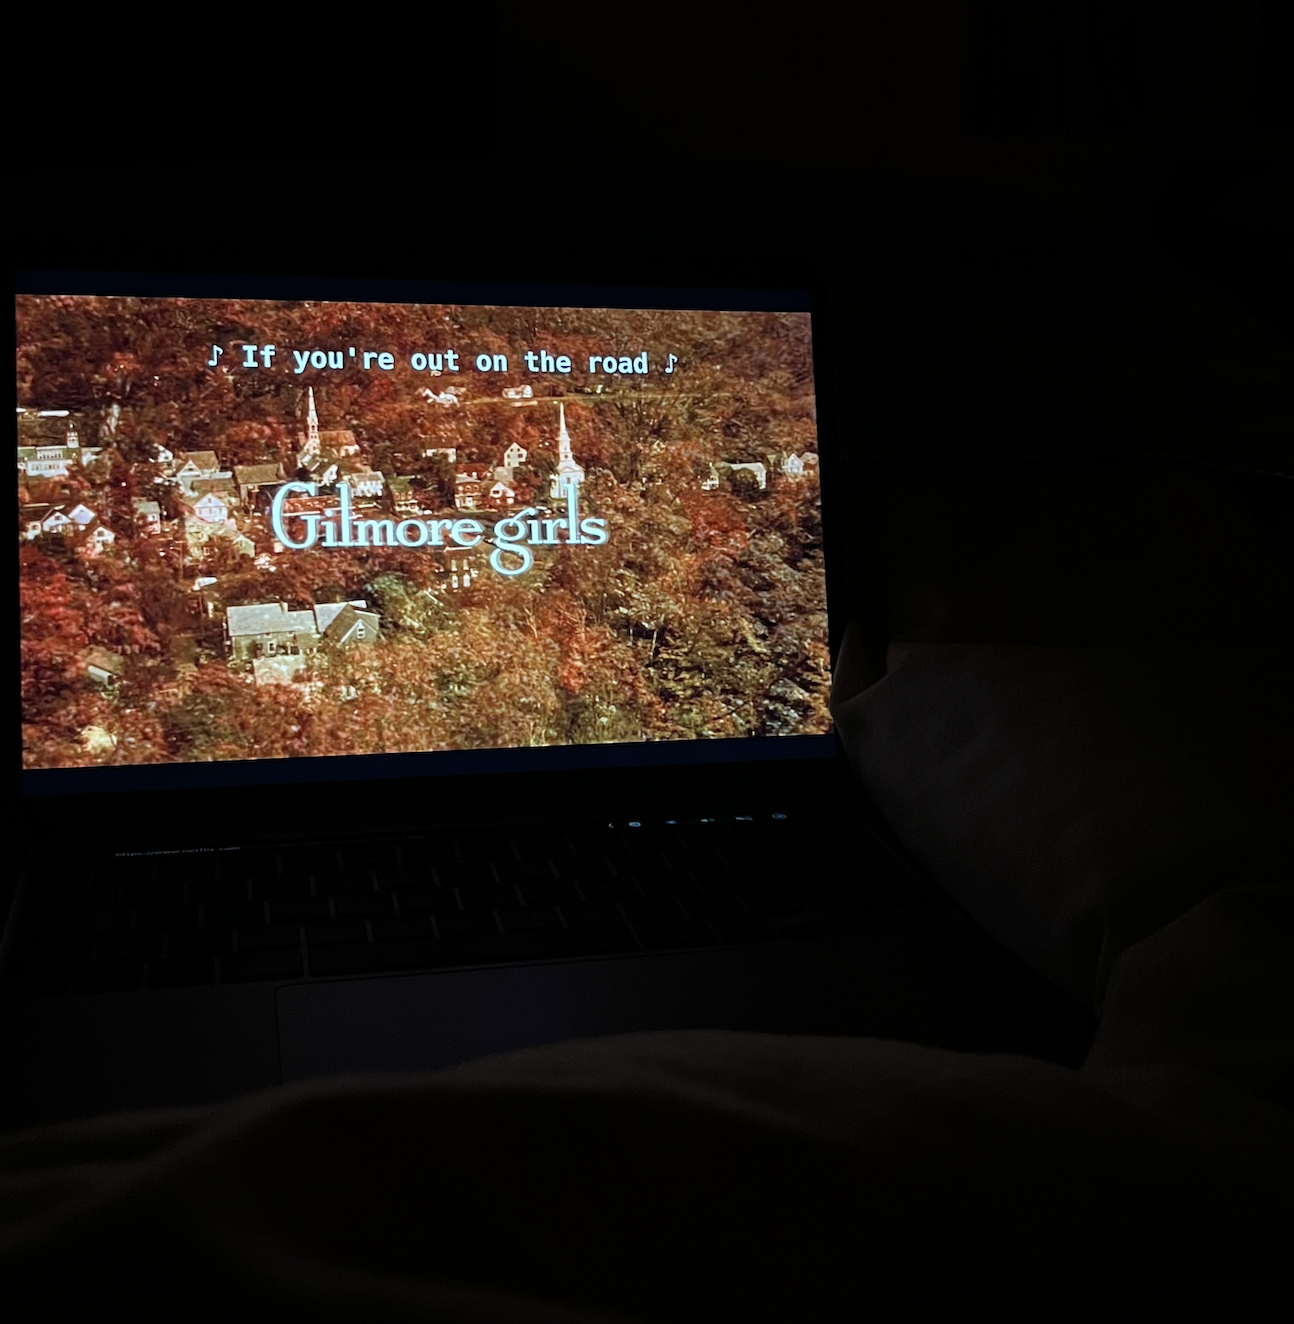 Watching Gilmore Girls in bed